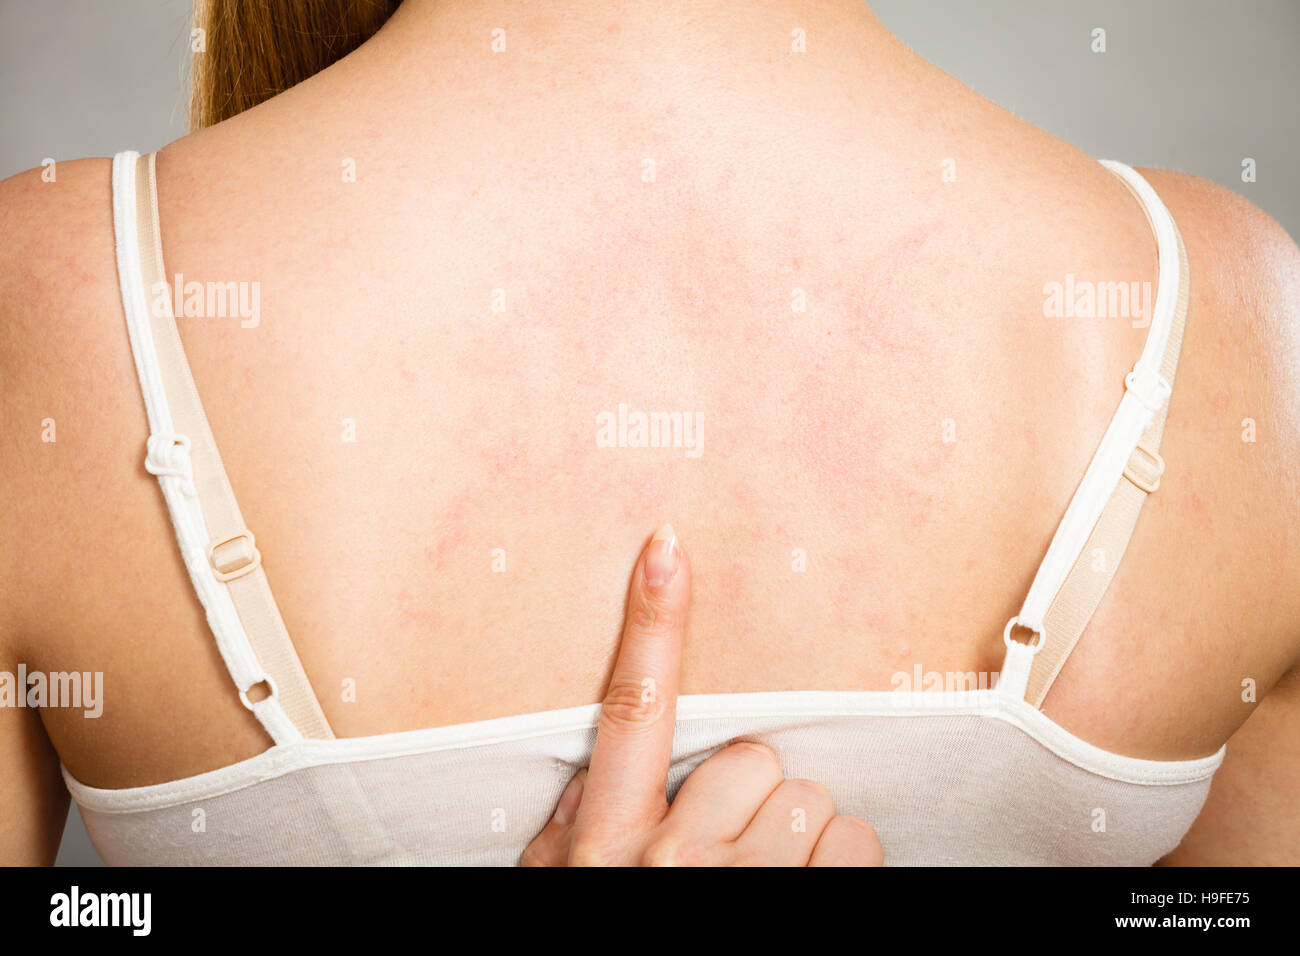 Health problem, skin diseases. Young woman showing her itchy back with  allergy rash urticaria symptoms Stock Photo - Alamy